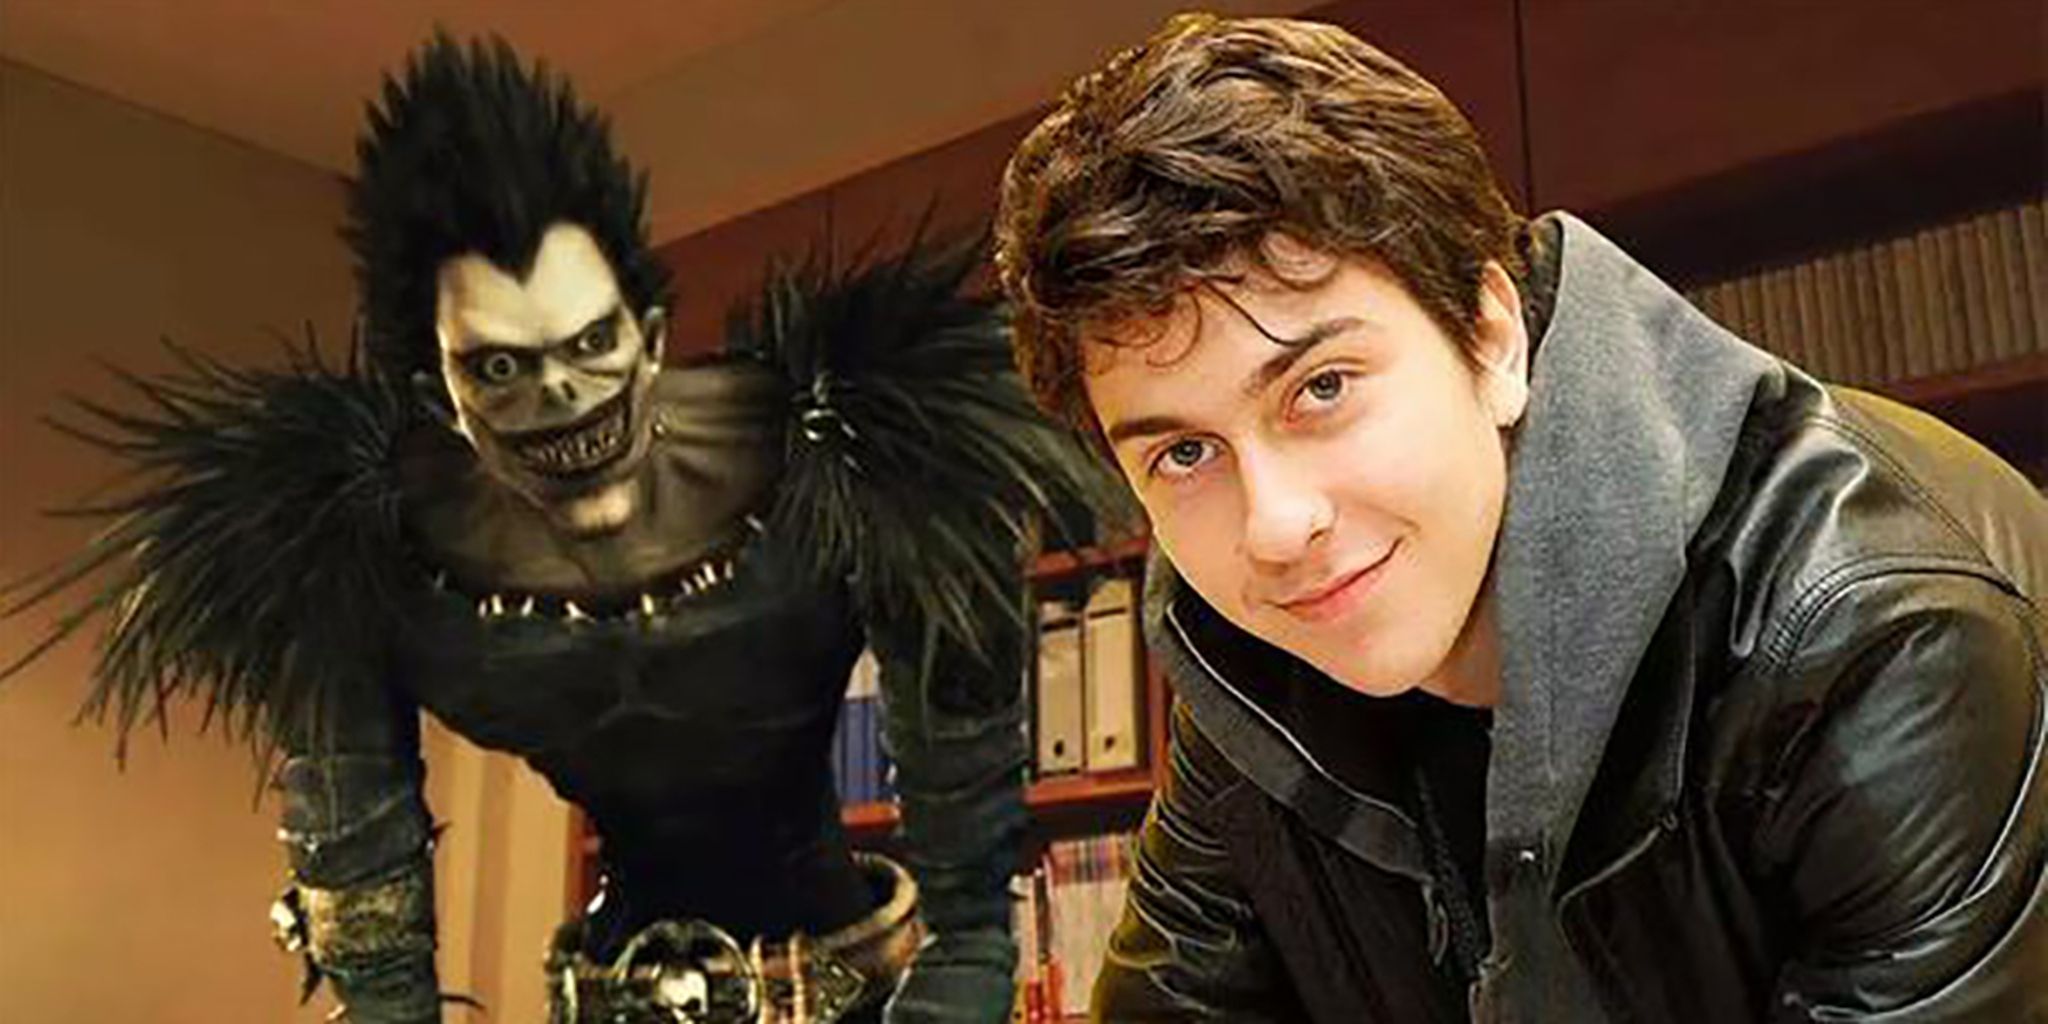 25 Secrets The Creators Of Death Note Want To Bury